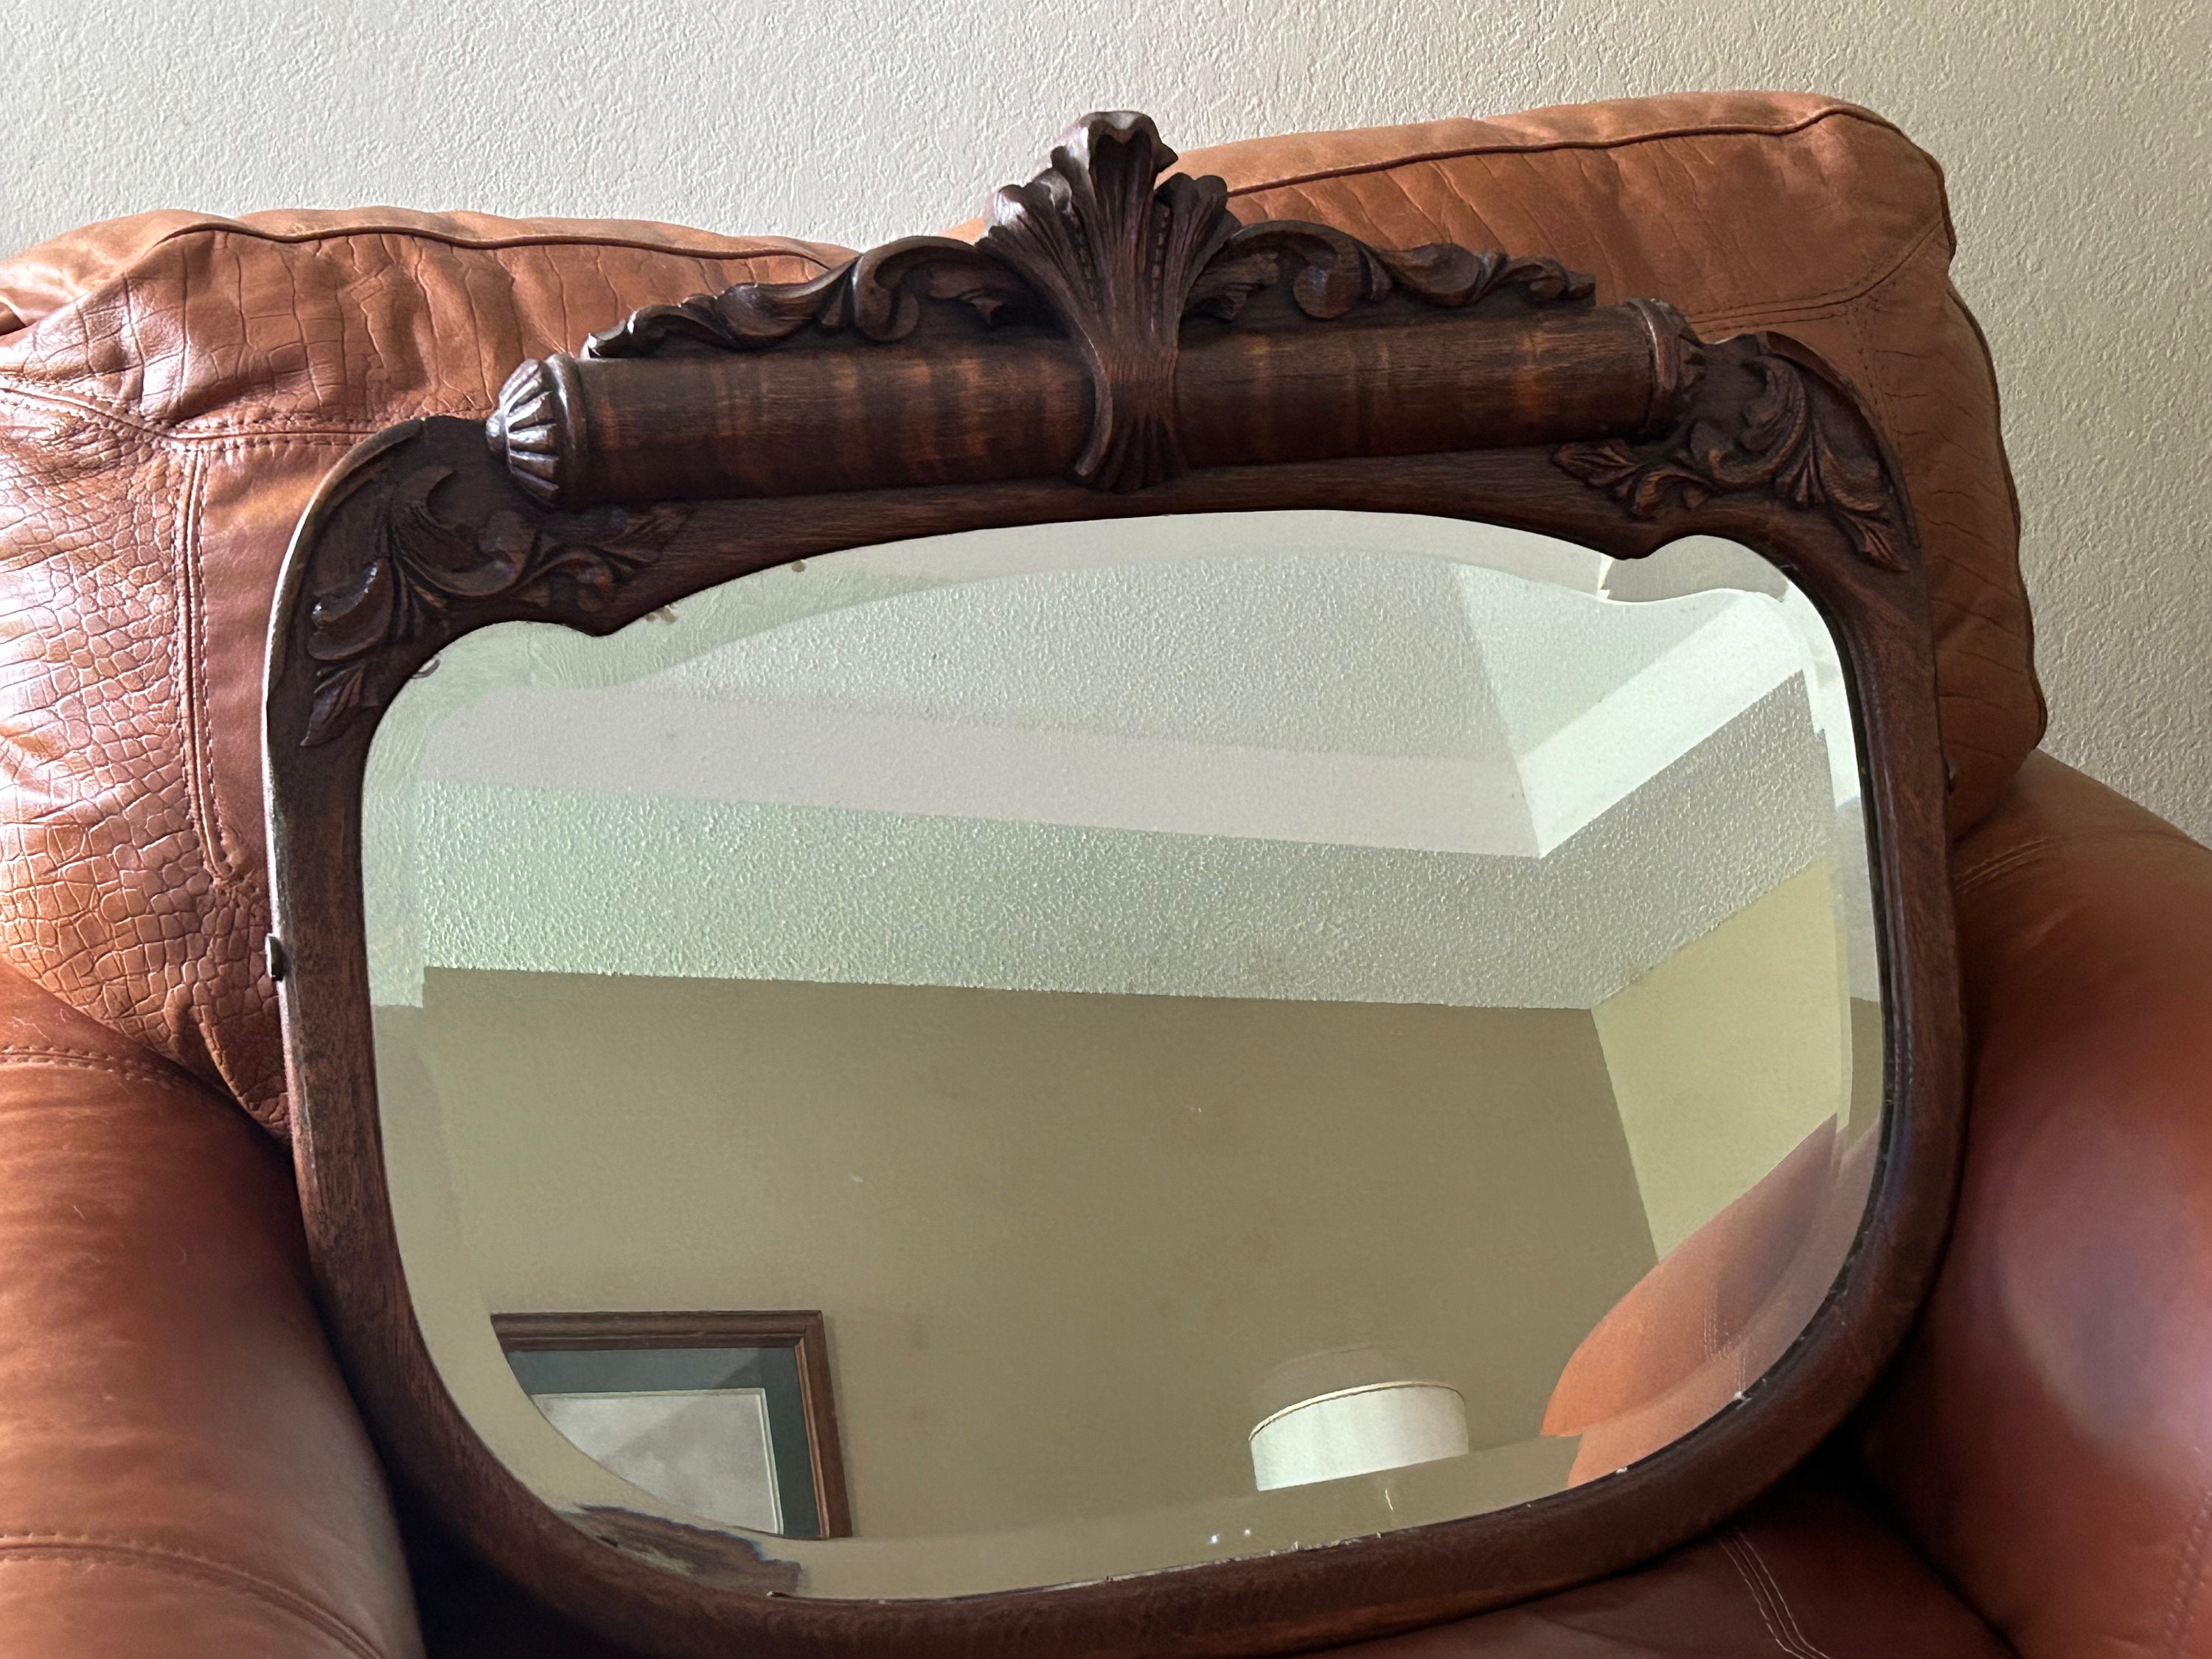 Unique Solid Oak 'Bow' Mirror - general for sale - by owner